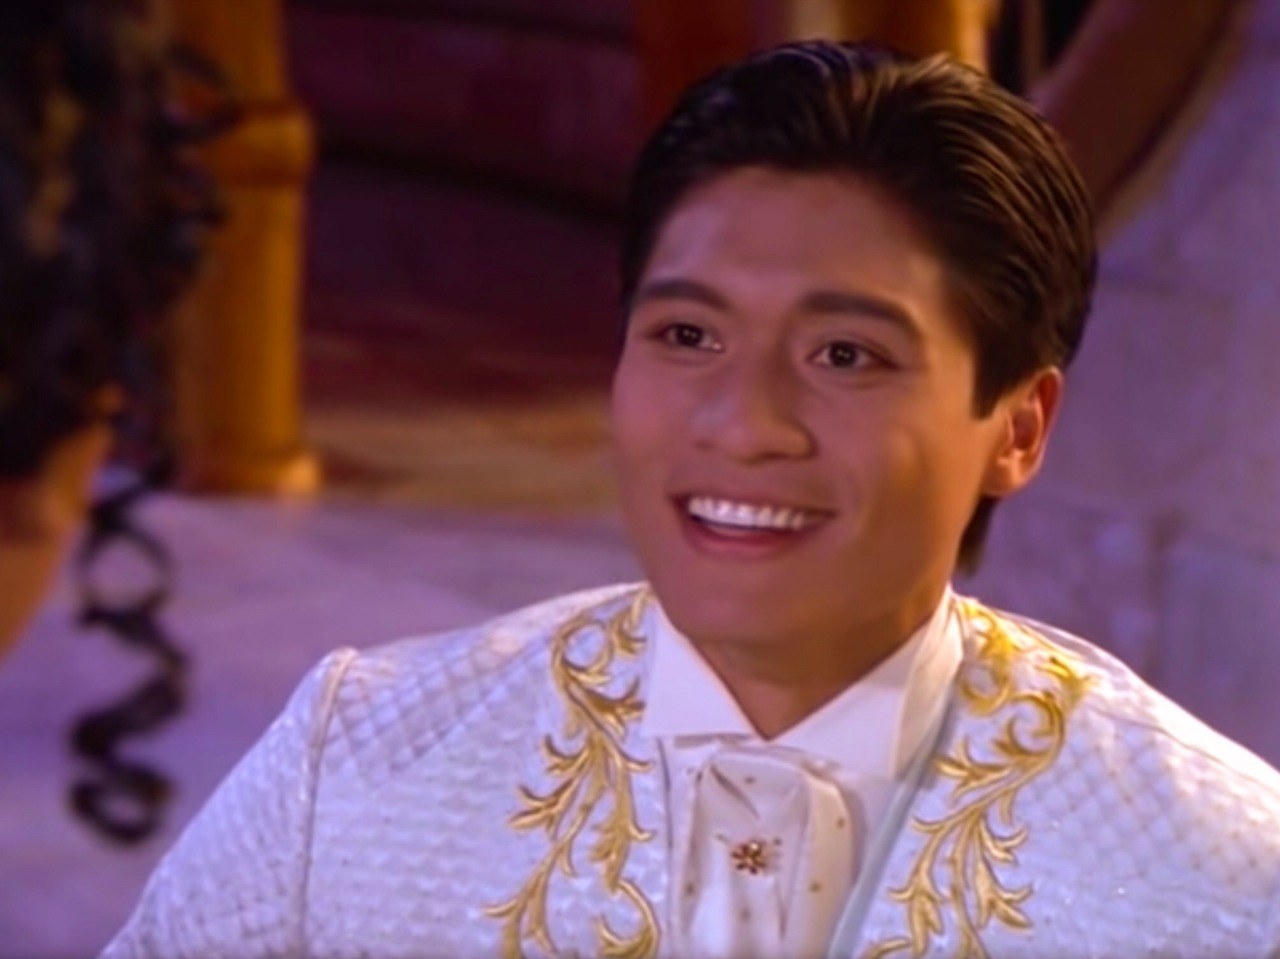 Paolo Montalbán as the Prince smiling up at Cinderella at the ball